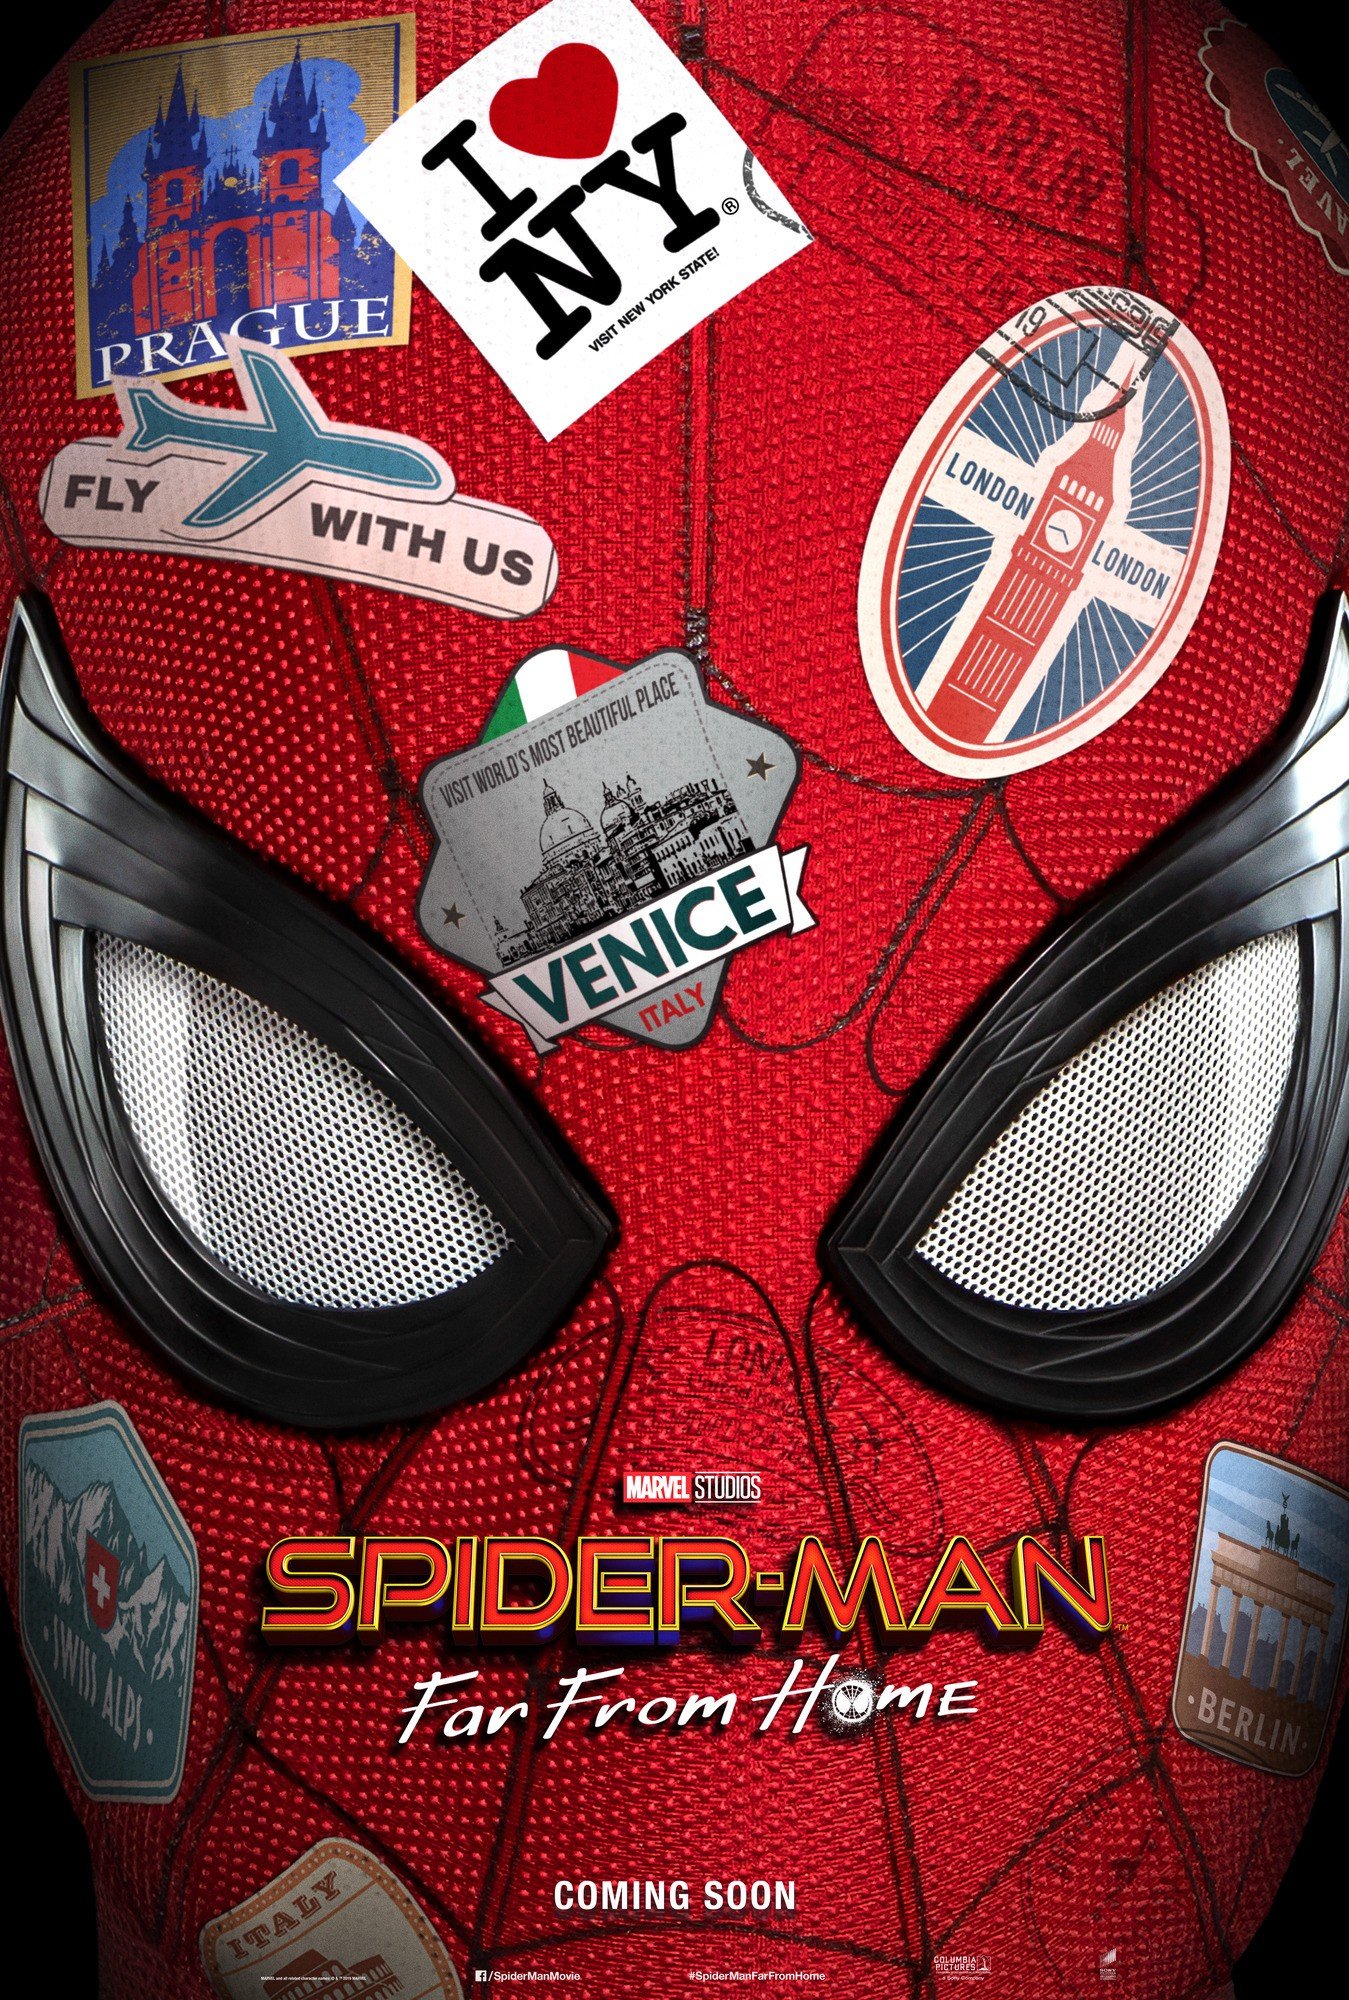 Poster of Sony Pictures' Spider-Man: Far From Home (2019)